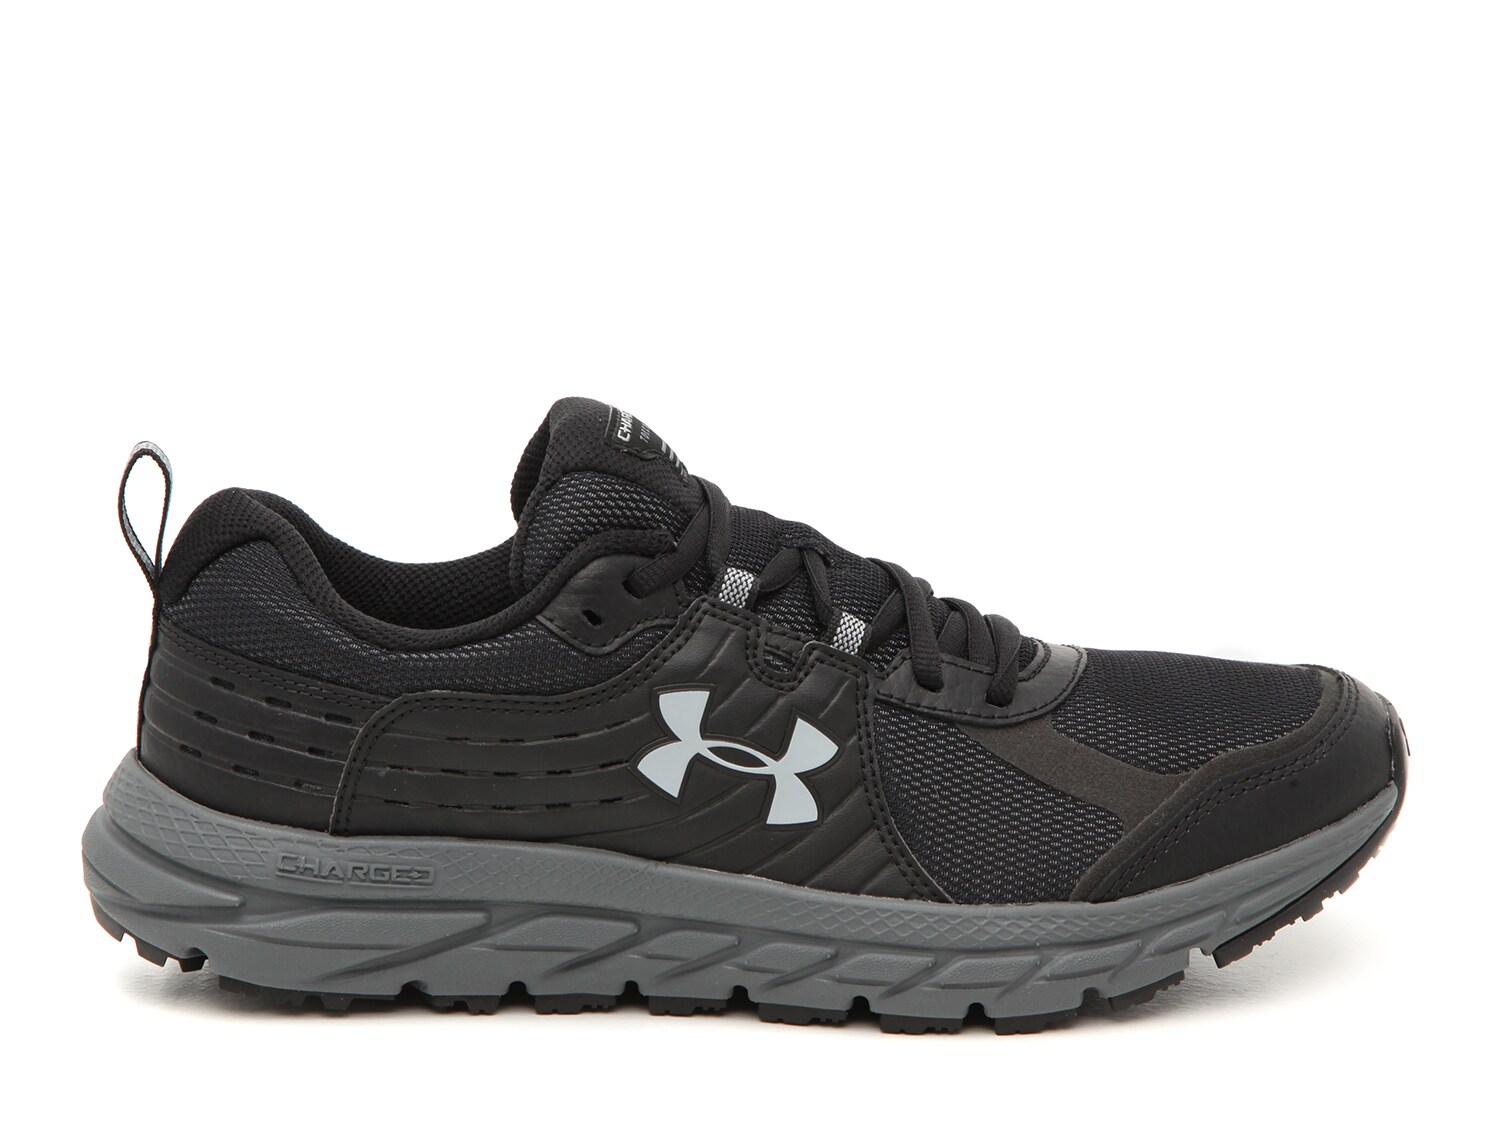 Under Armour Charged Toccoa 2 Running Shoe - Men's Men's Shoes | DSW